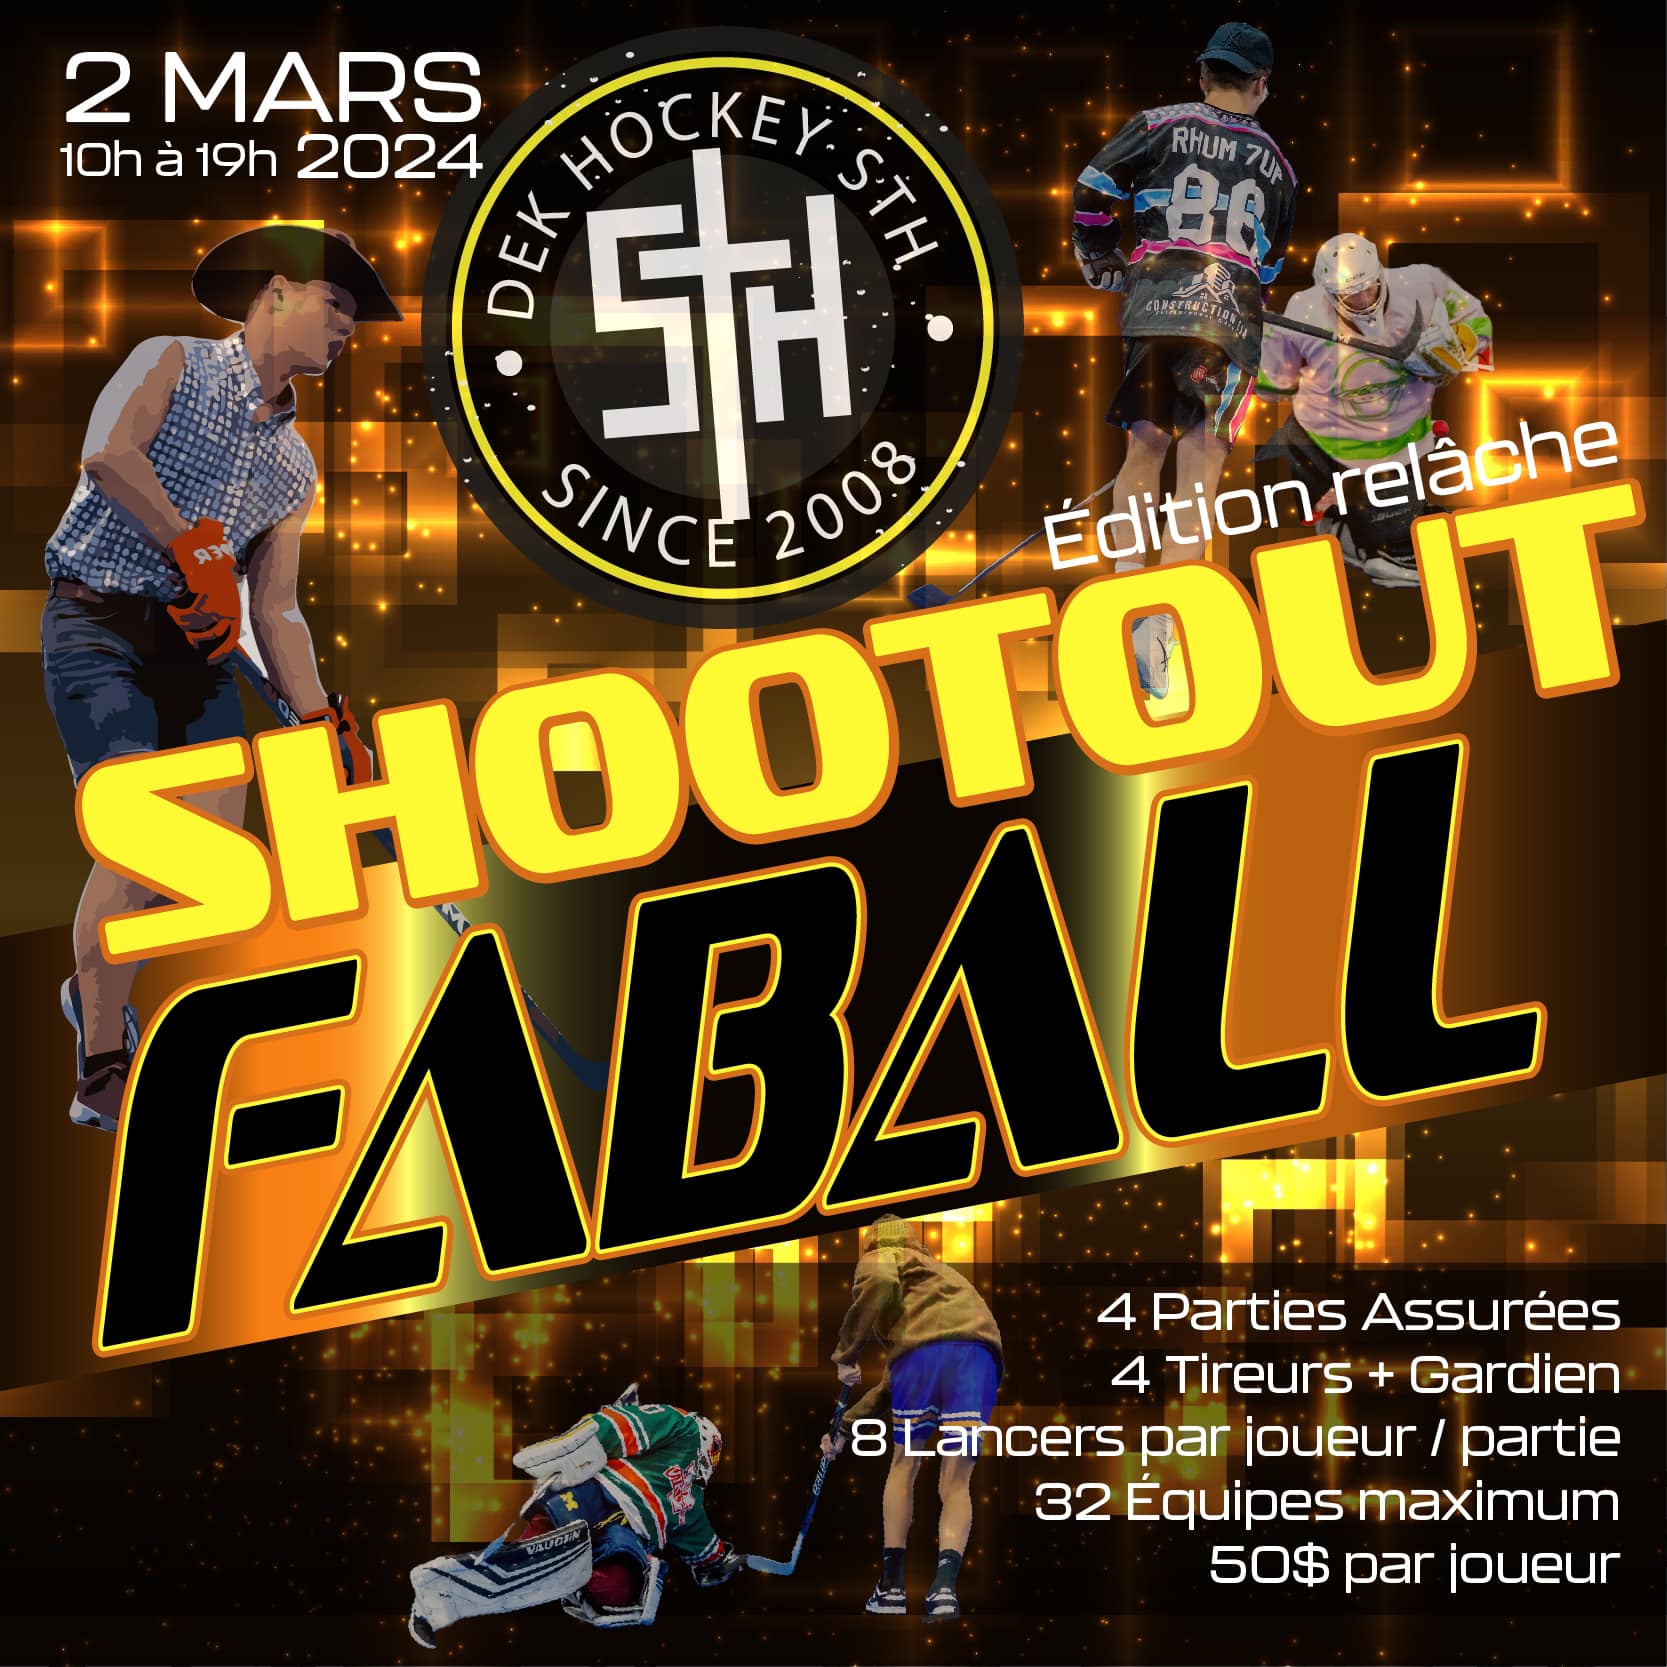 Shooothout 2 Mars